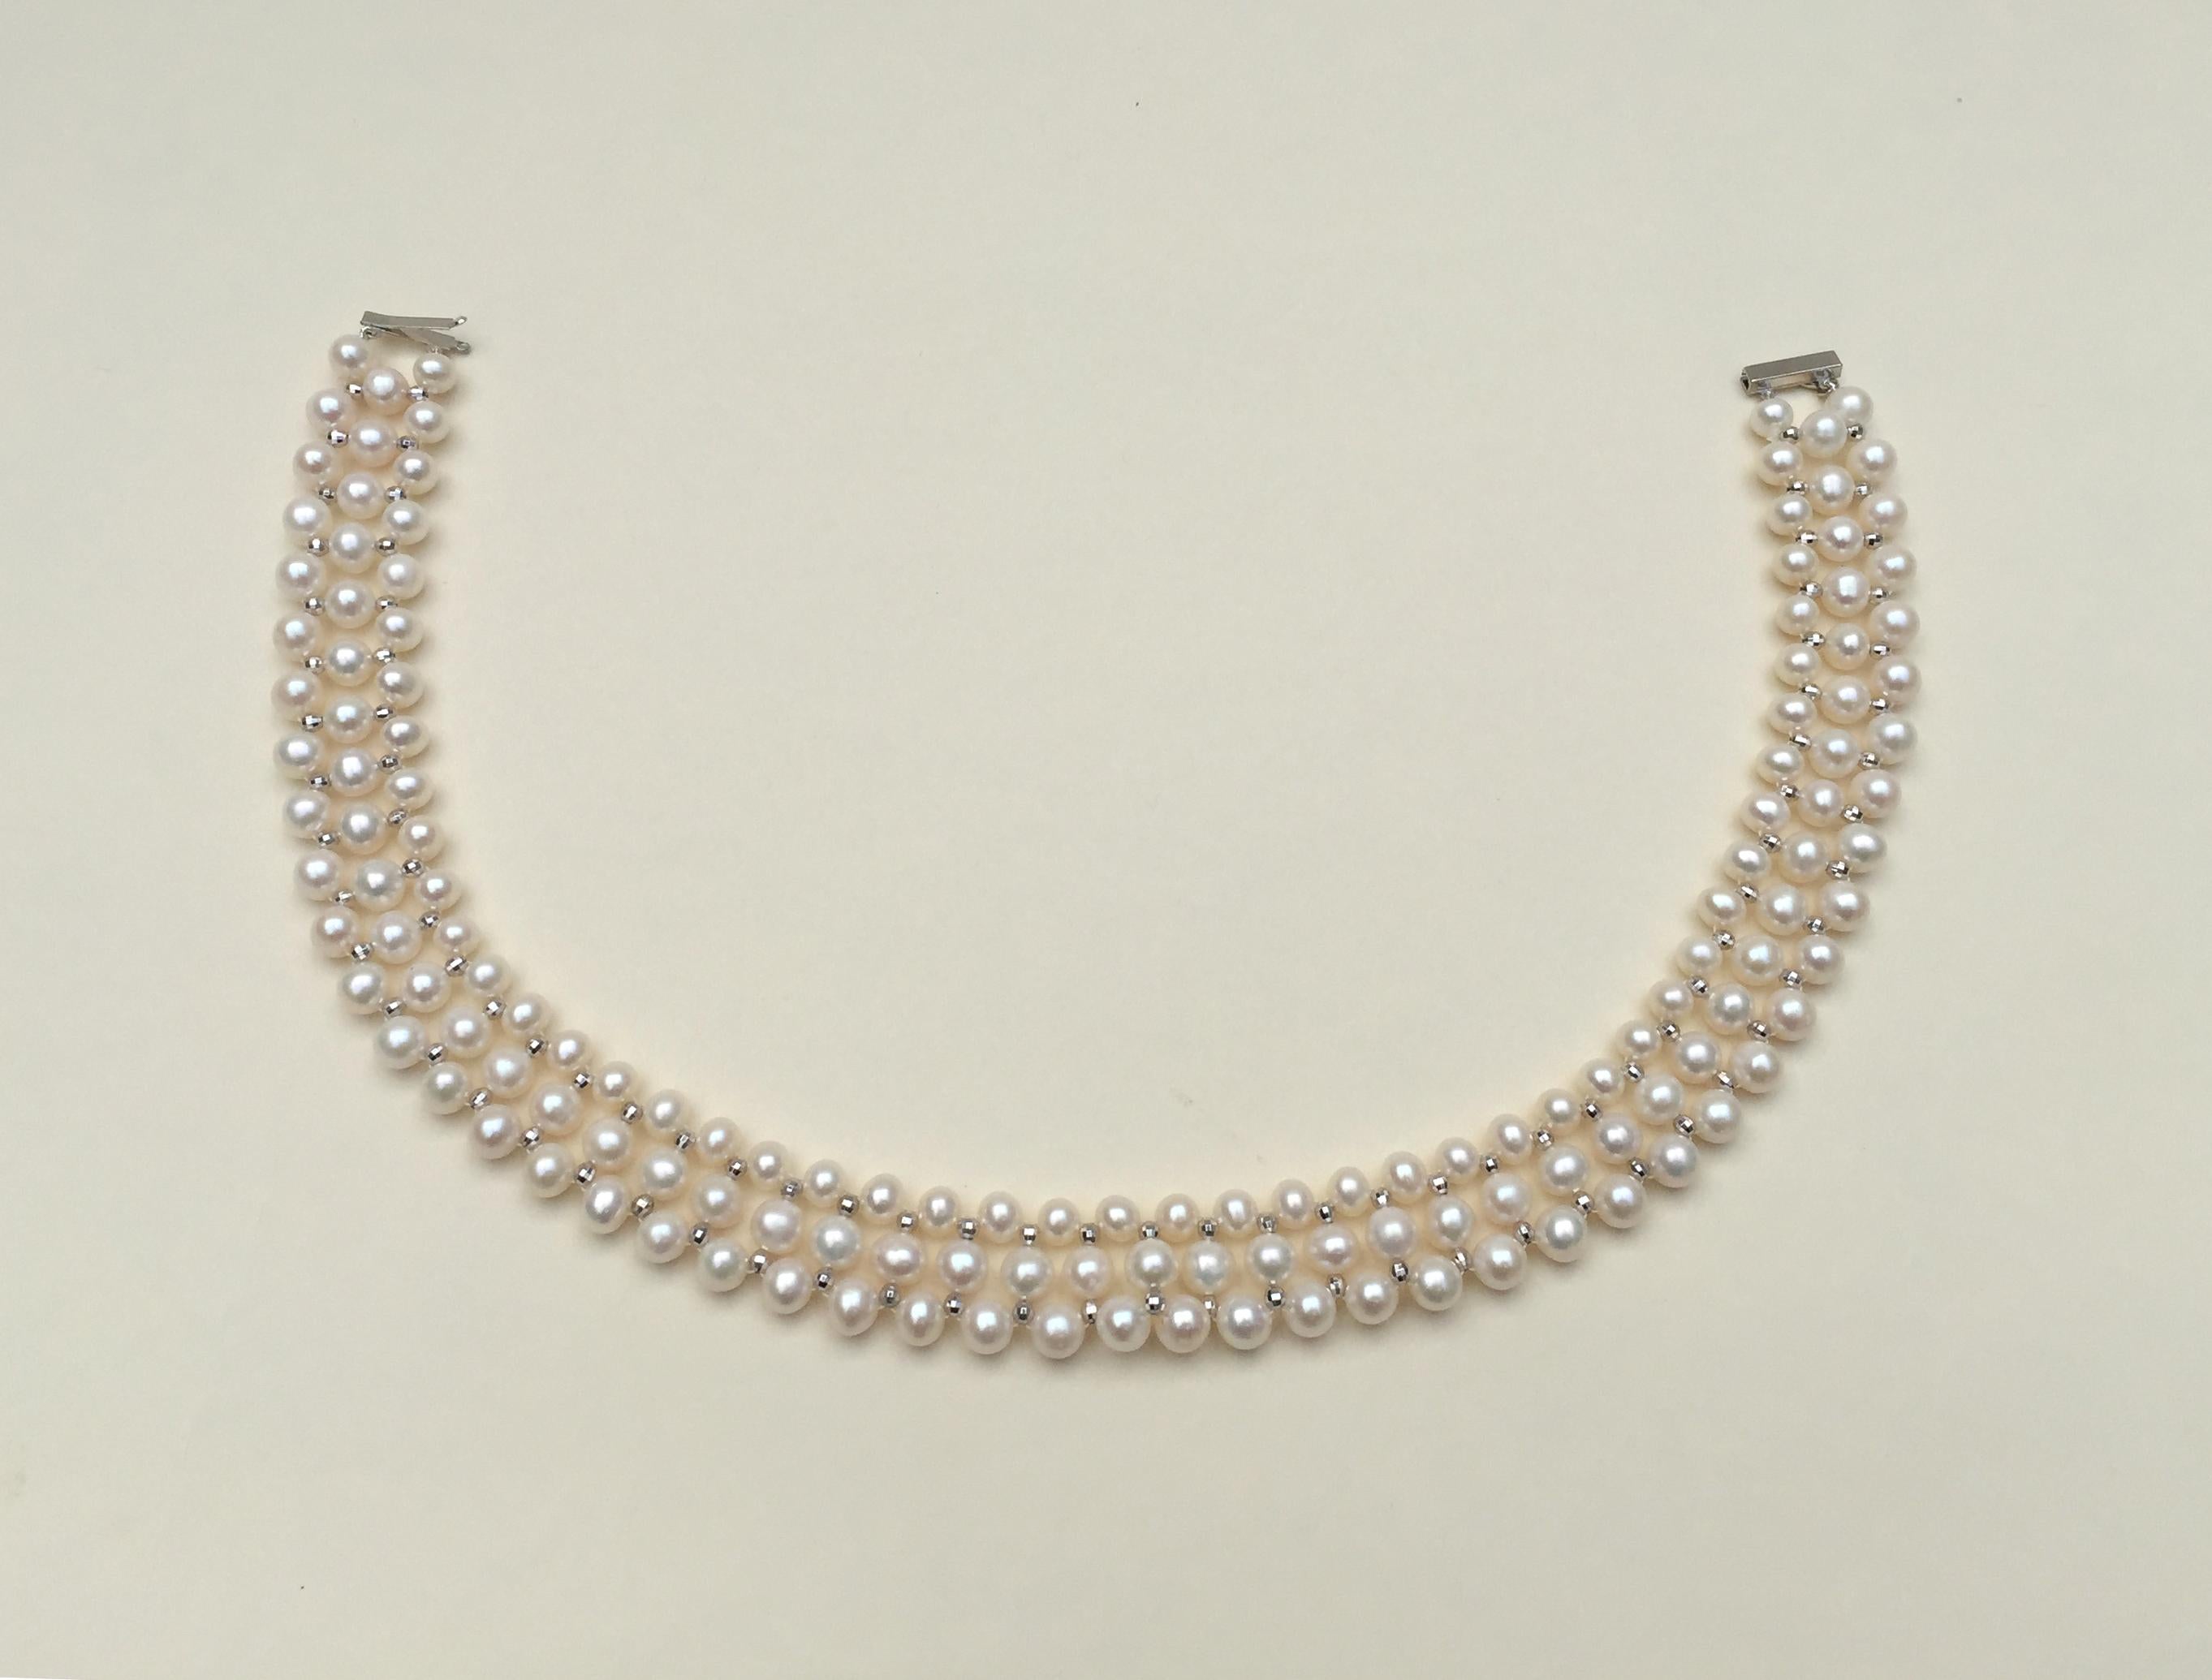 Women's Marina J Woven Pearl Necklace with 14 K White Gold Faceted Beads and Clasp